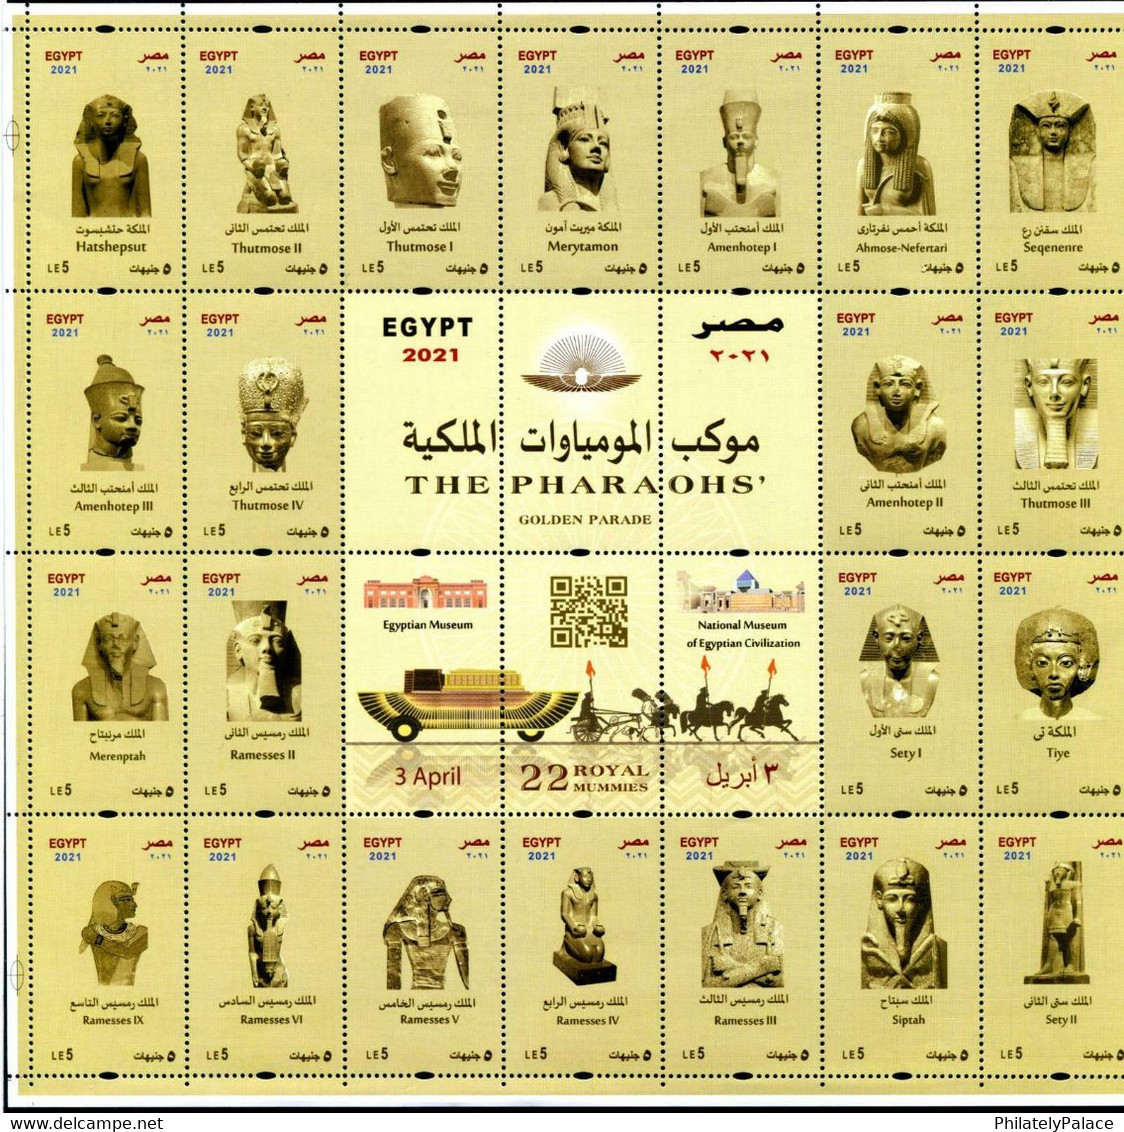 EGYPT 2021 THE PHARAOHS' GOLDEN PARADE 22 ROYAL MUMMIES KING & QUEENS SHEET MINT MNH (**) - Used Stamps